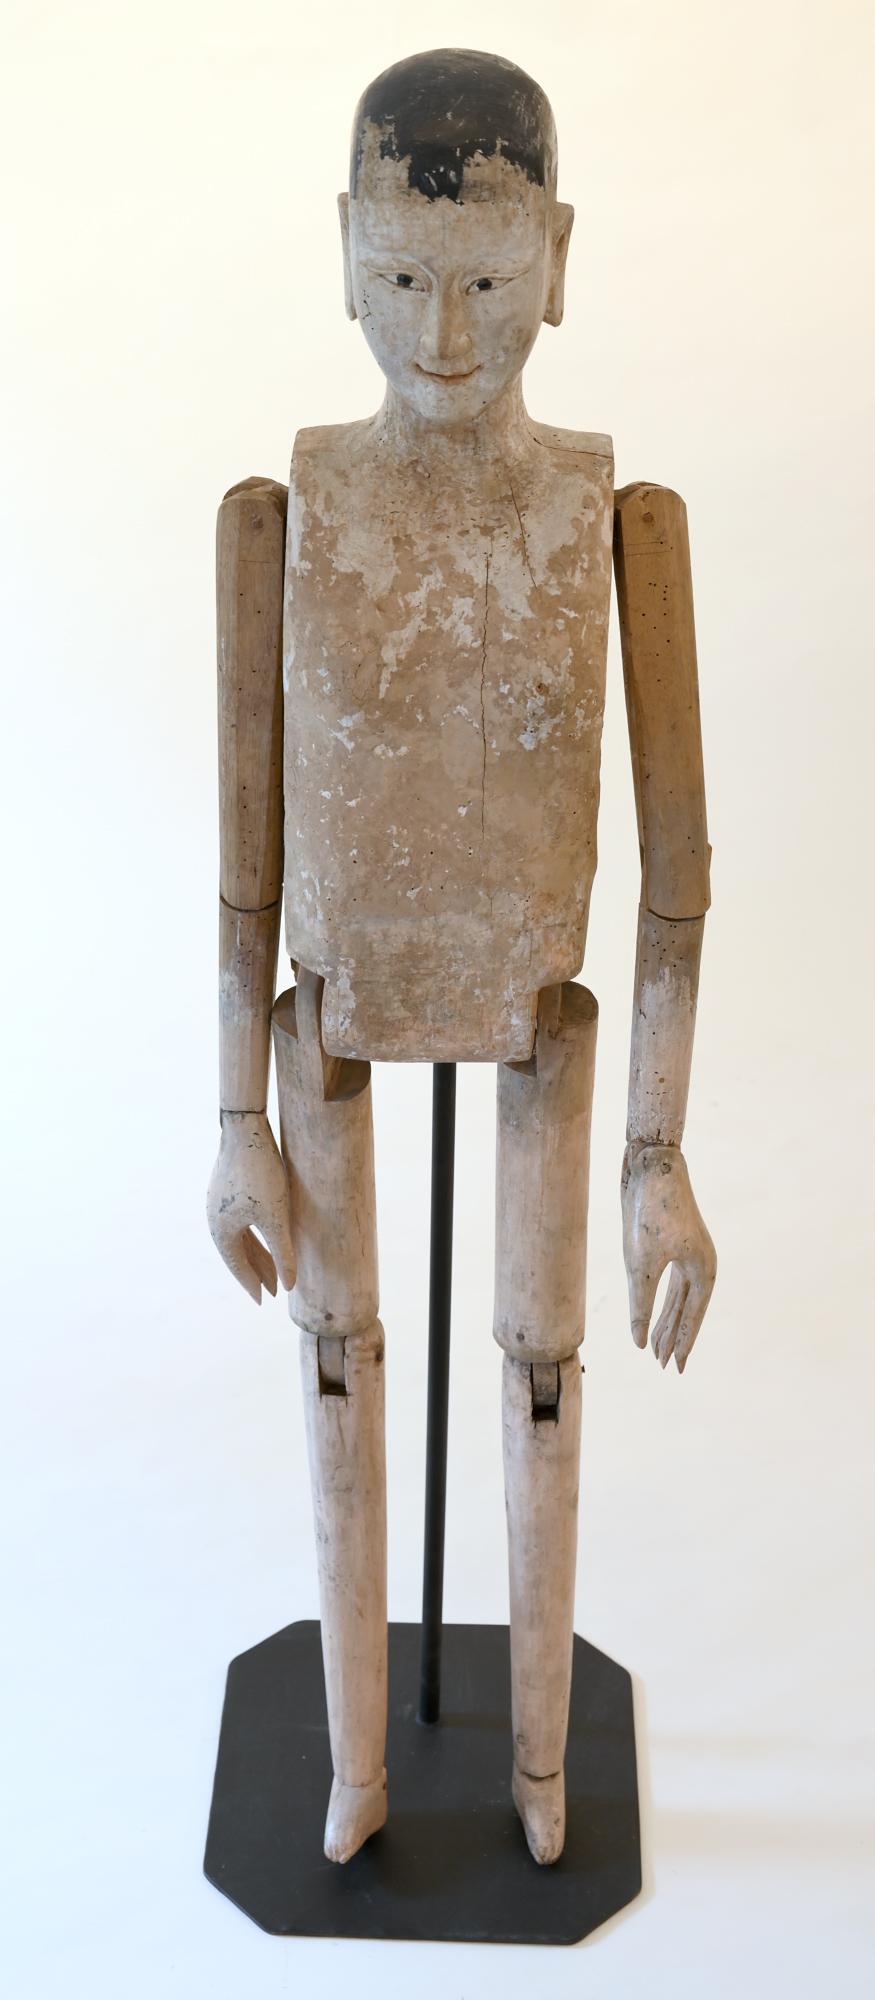 Wood mannequin from Kanton, China circa 1900 original painting

Wood mannequin partly original painting circa 1900
Arms and legs are moveable 
Special elaboration of the head an the hands.